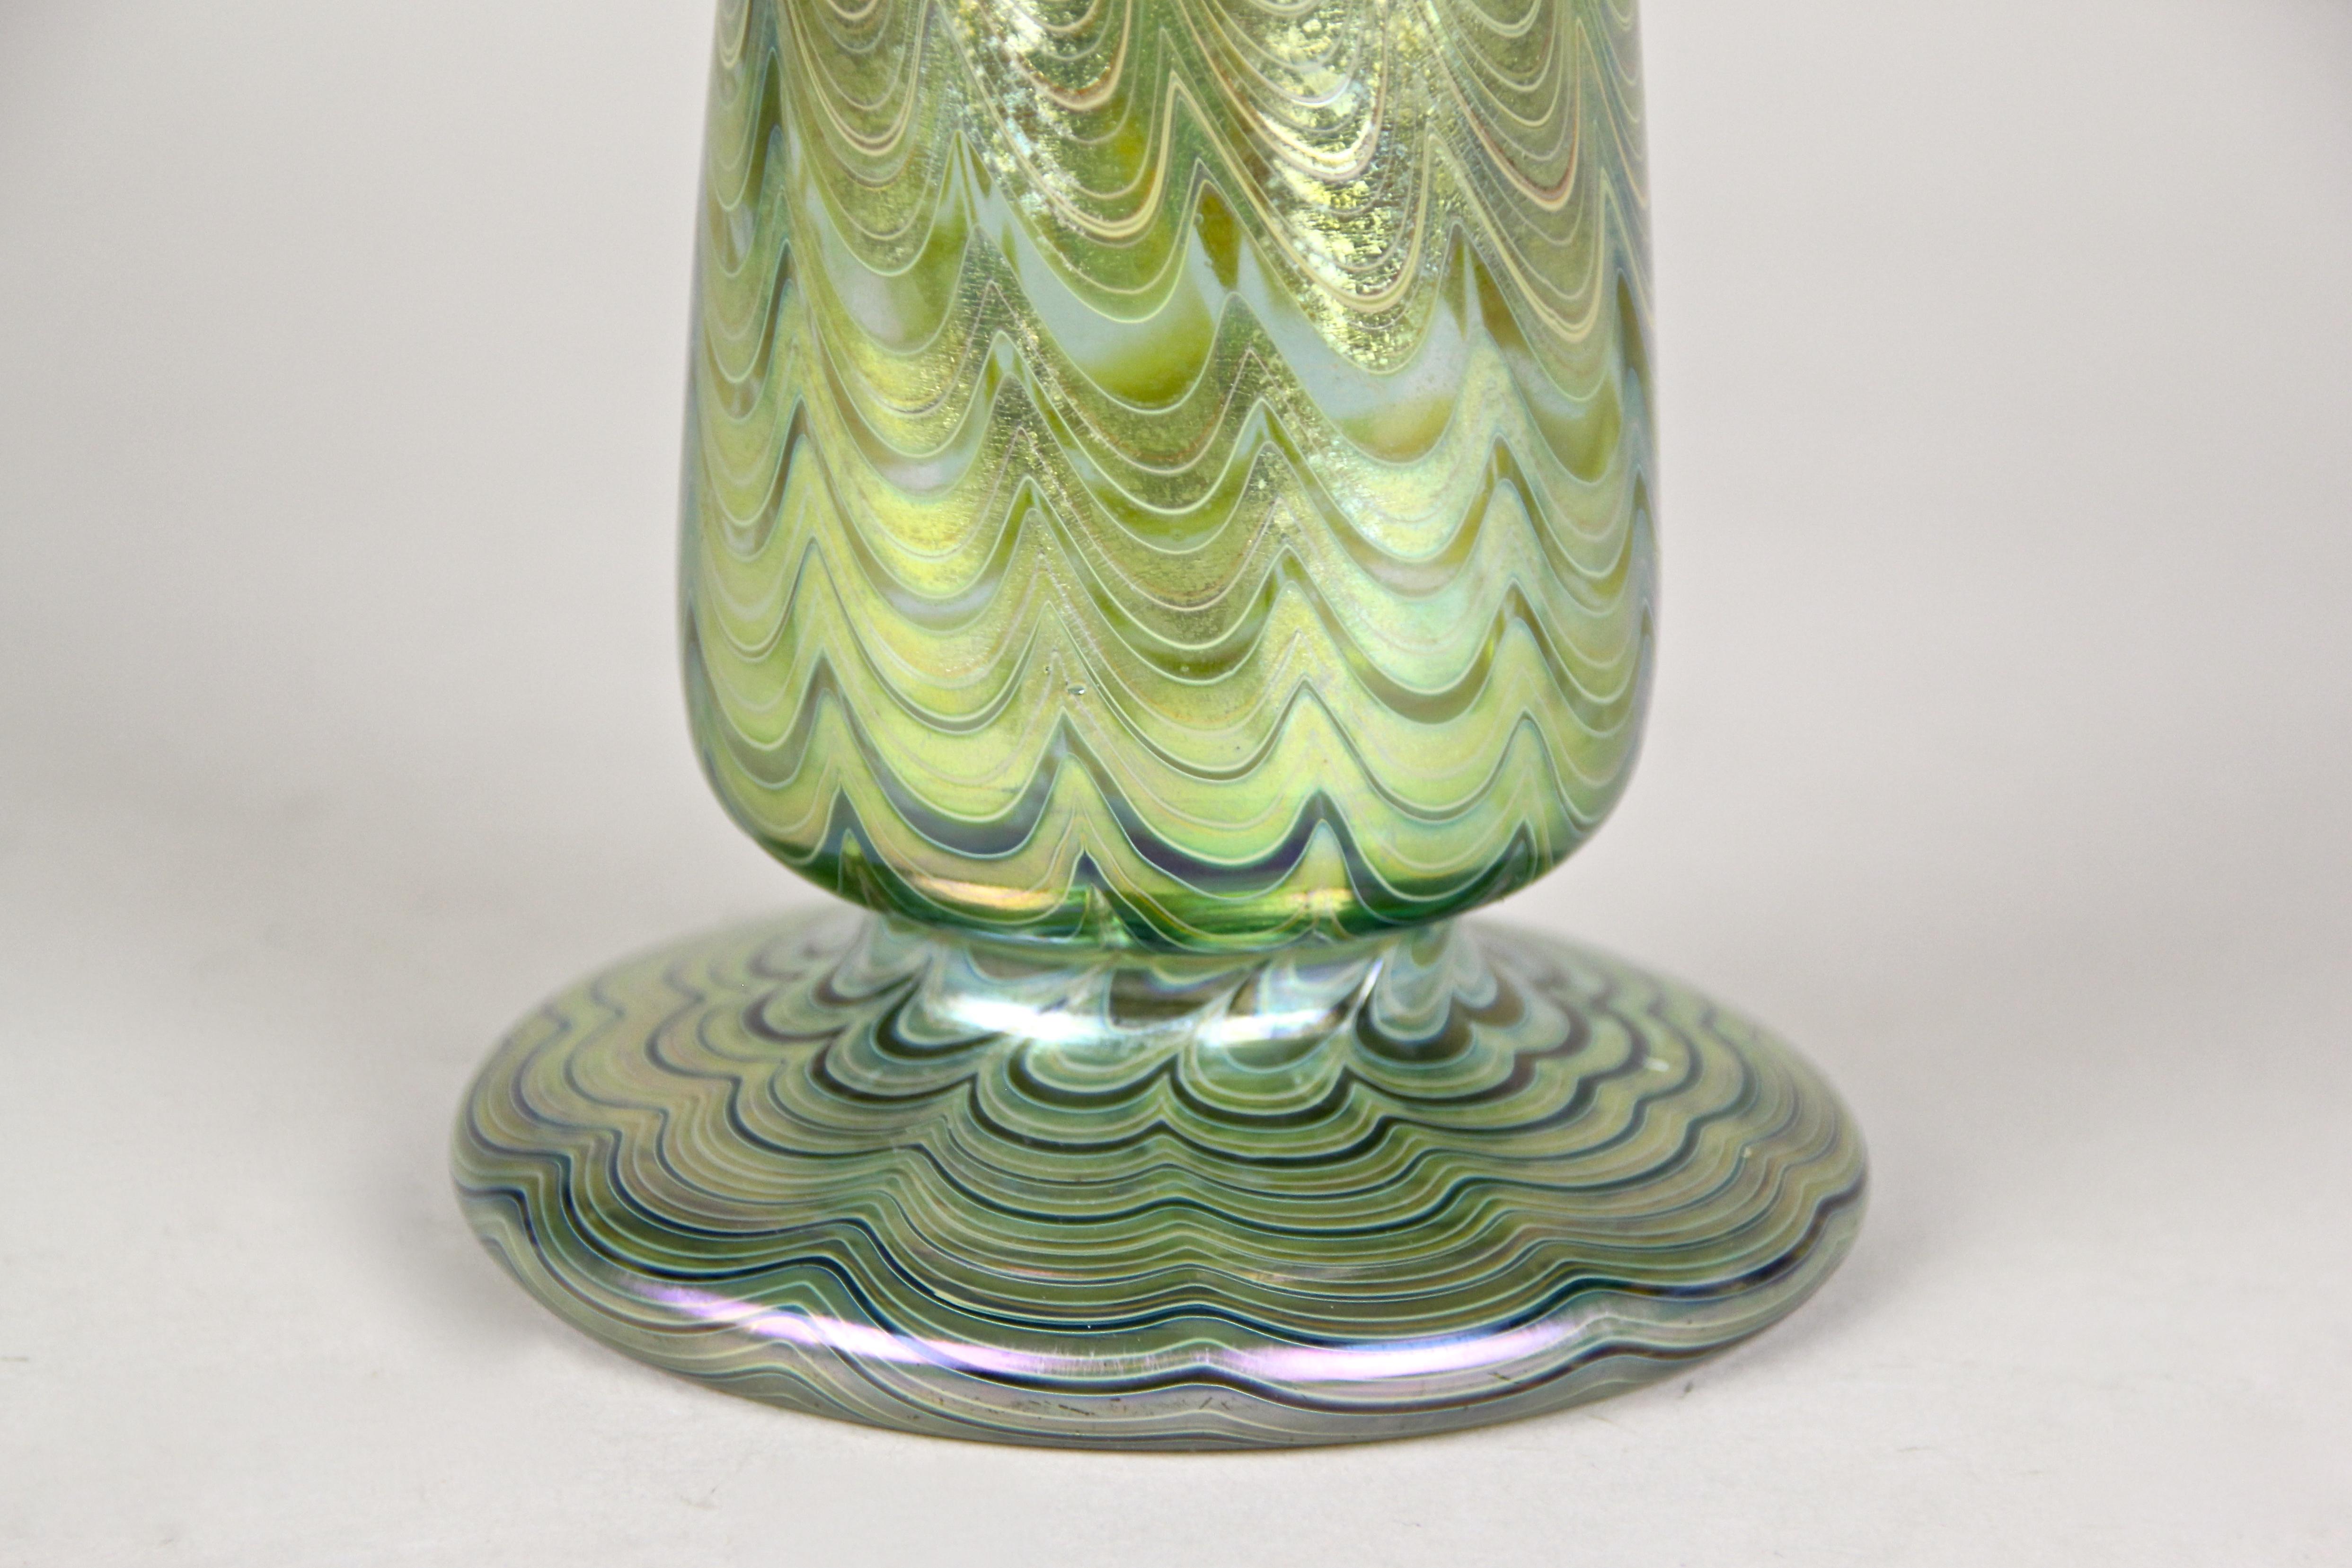 Fantastic Loetz Witwe glass vase out of the famous workshops in Klostermuehle/ Bohemia, circa 1899. The beautifully shaped glass vase was artfully processed in the breathtaking decor Phaenomen green genre 6893 and impresses with its blue or green or